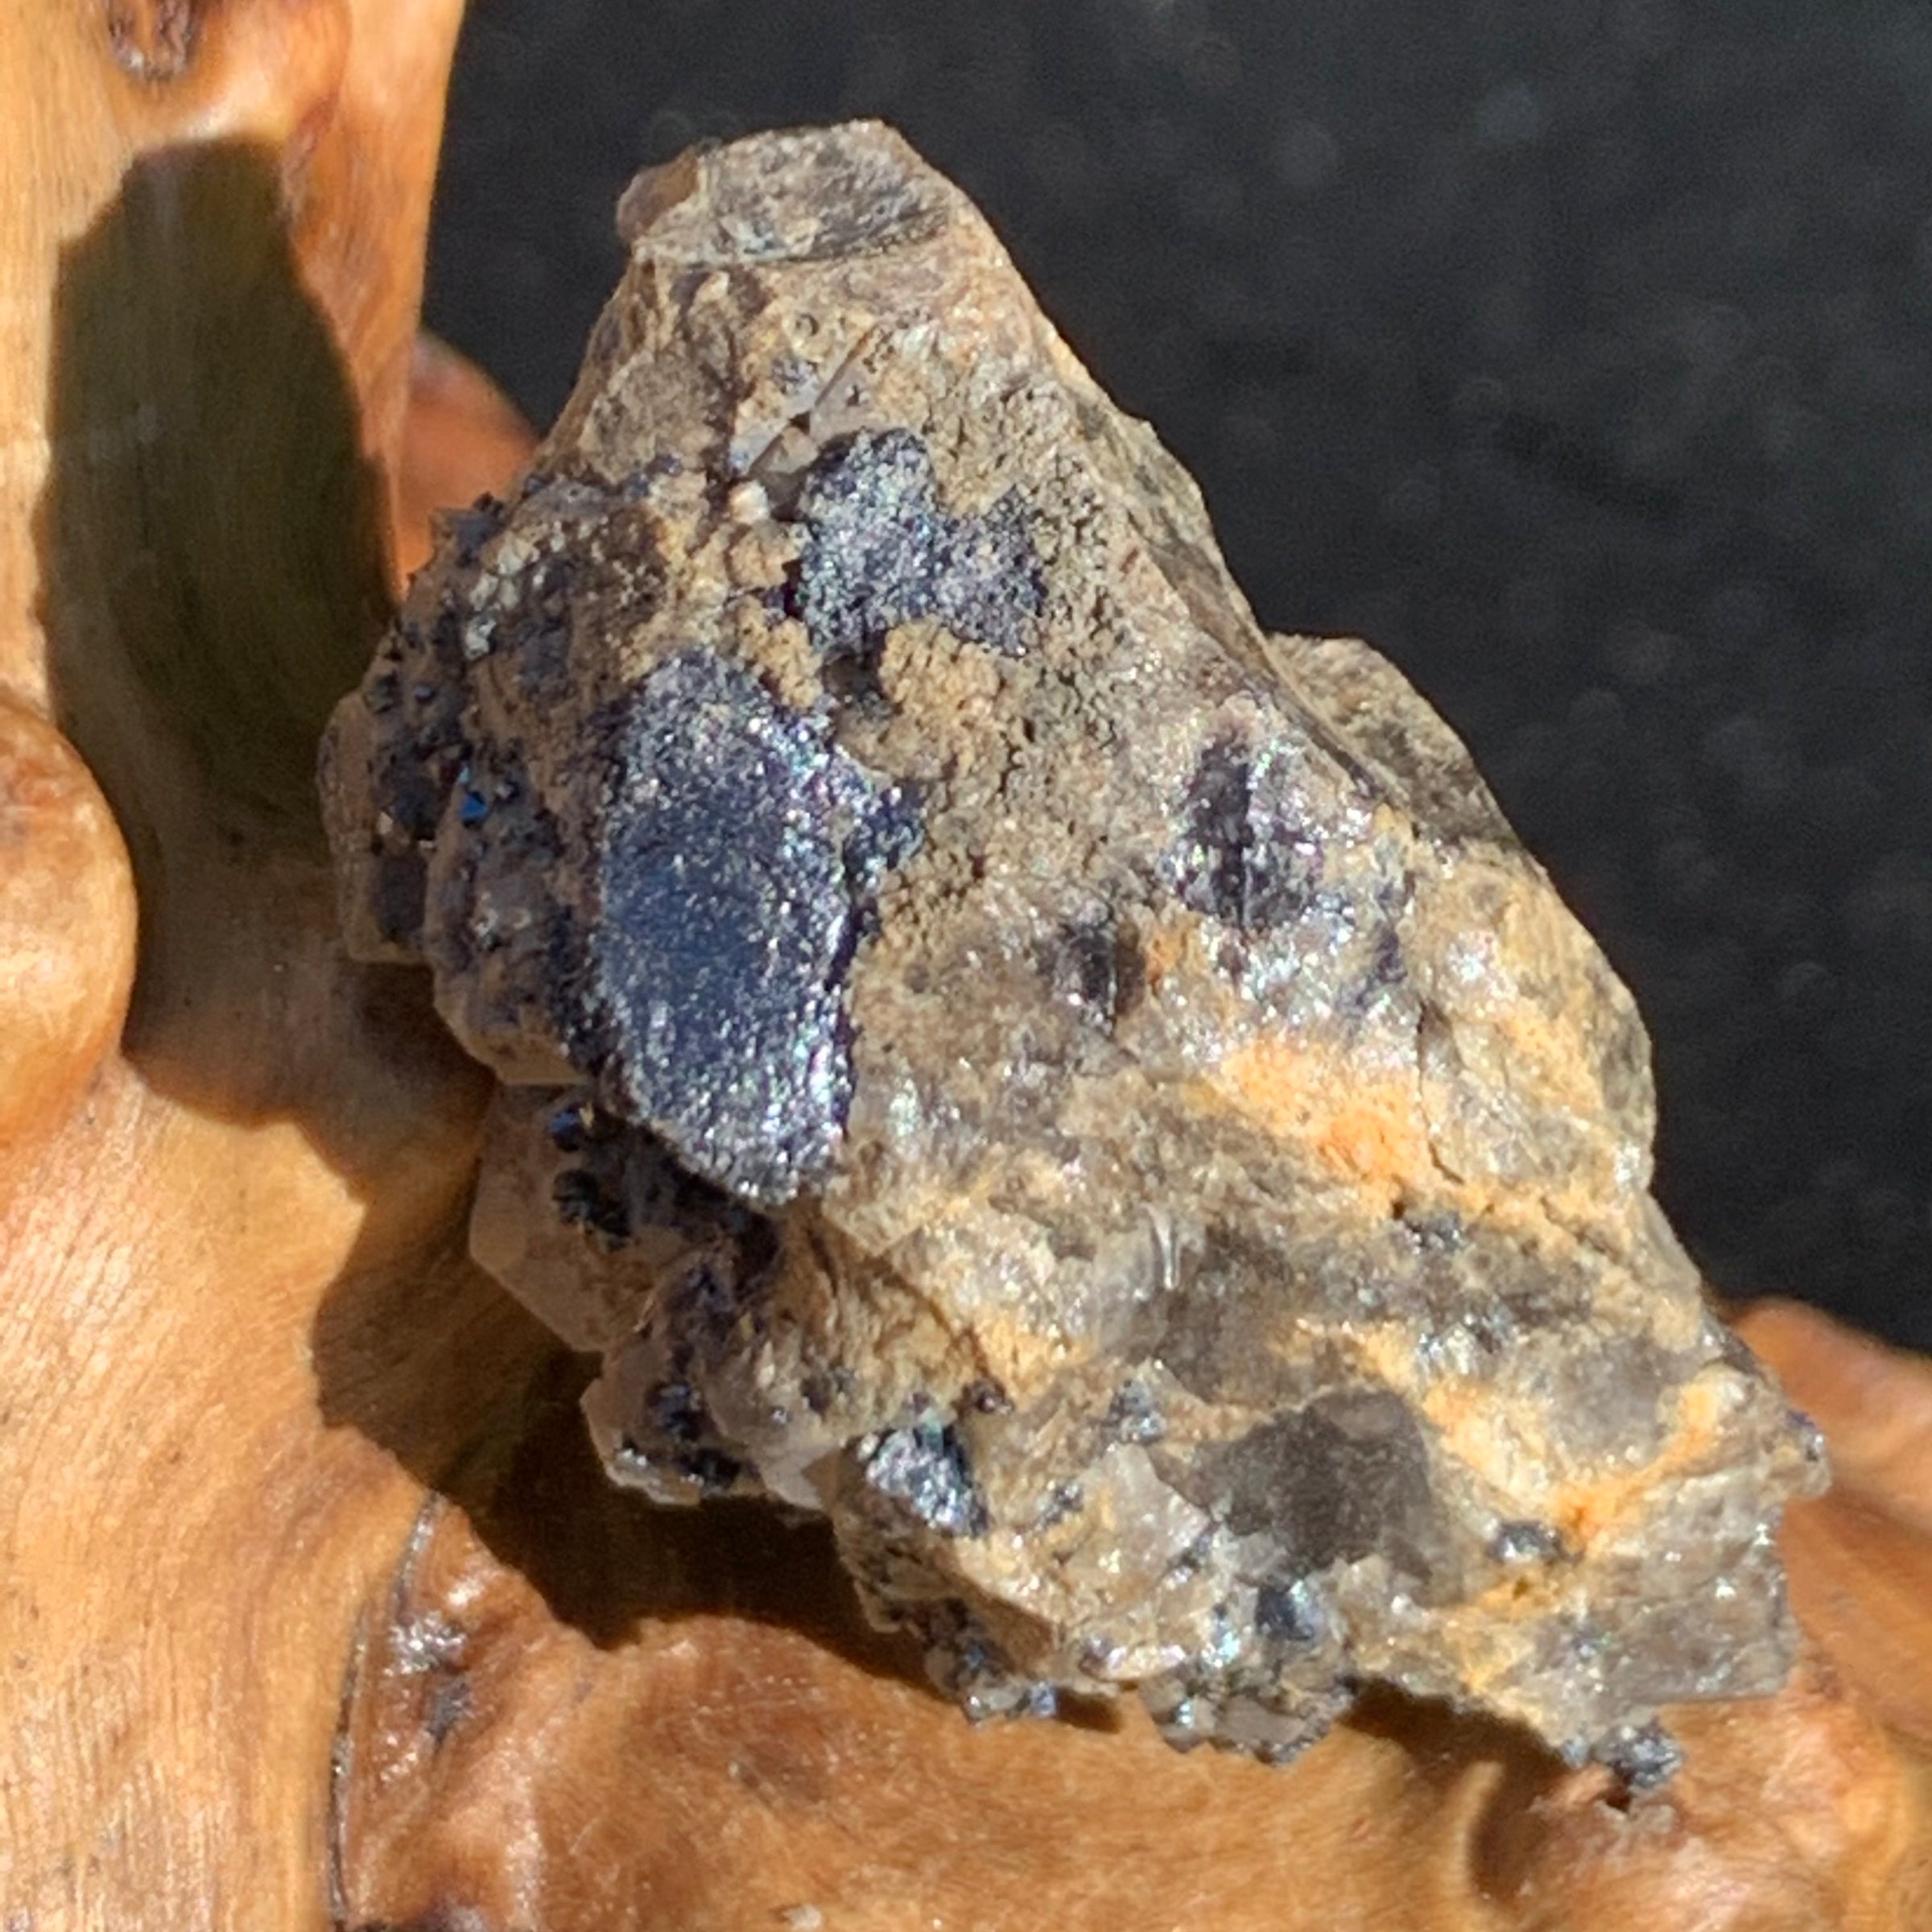 small brookite crystals on a smokey quartz cluster sitting on driftwood for display